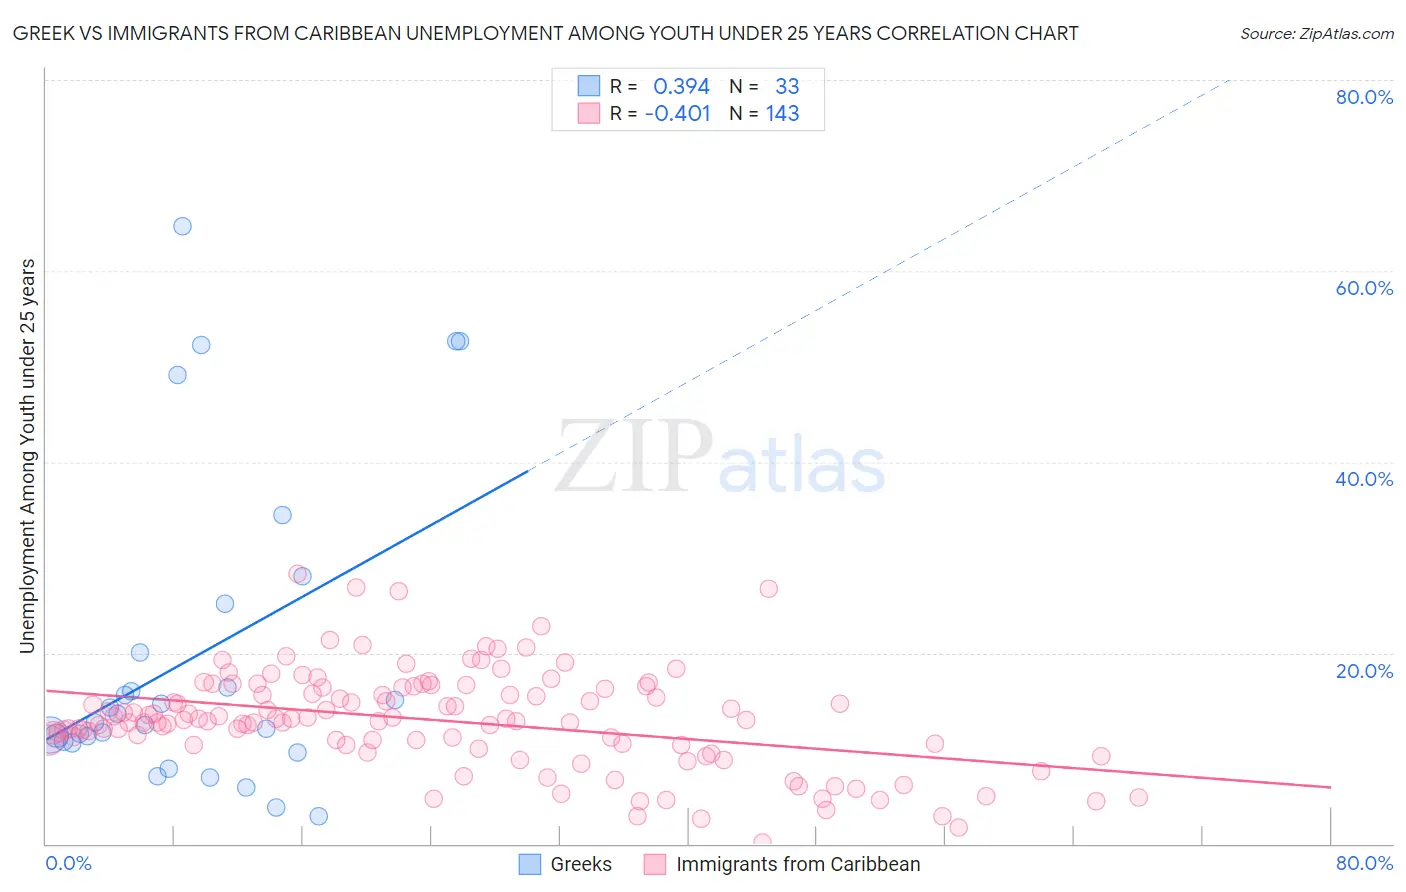 Greek vs Immigrants from Caribbean Unemployment Among Youth under 25 years